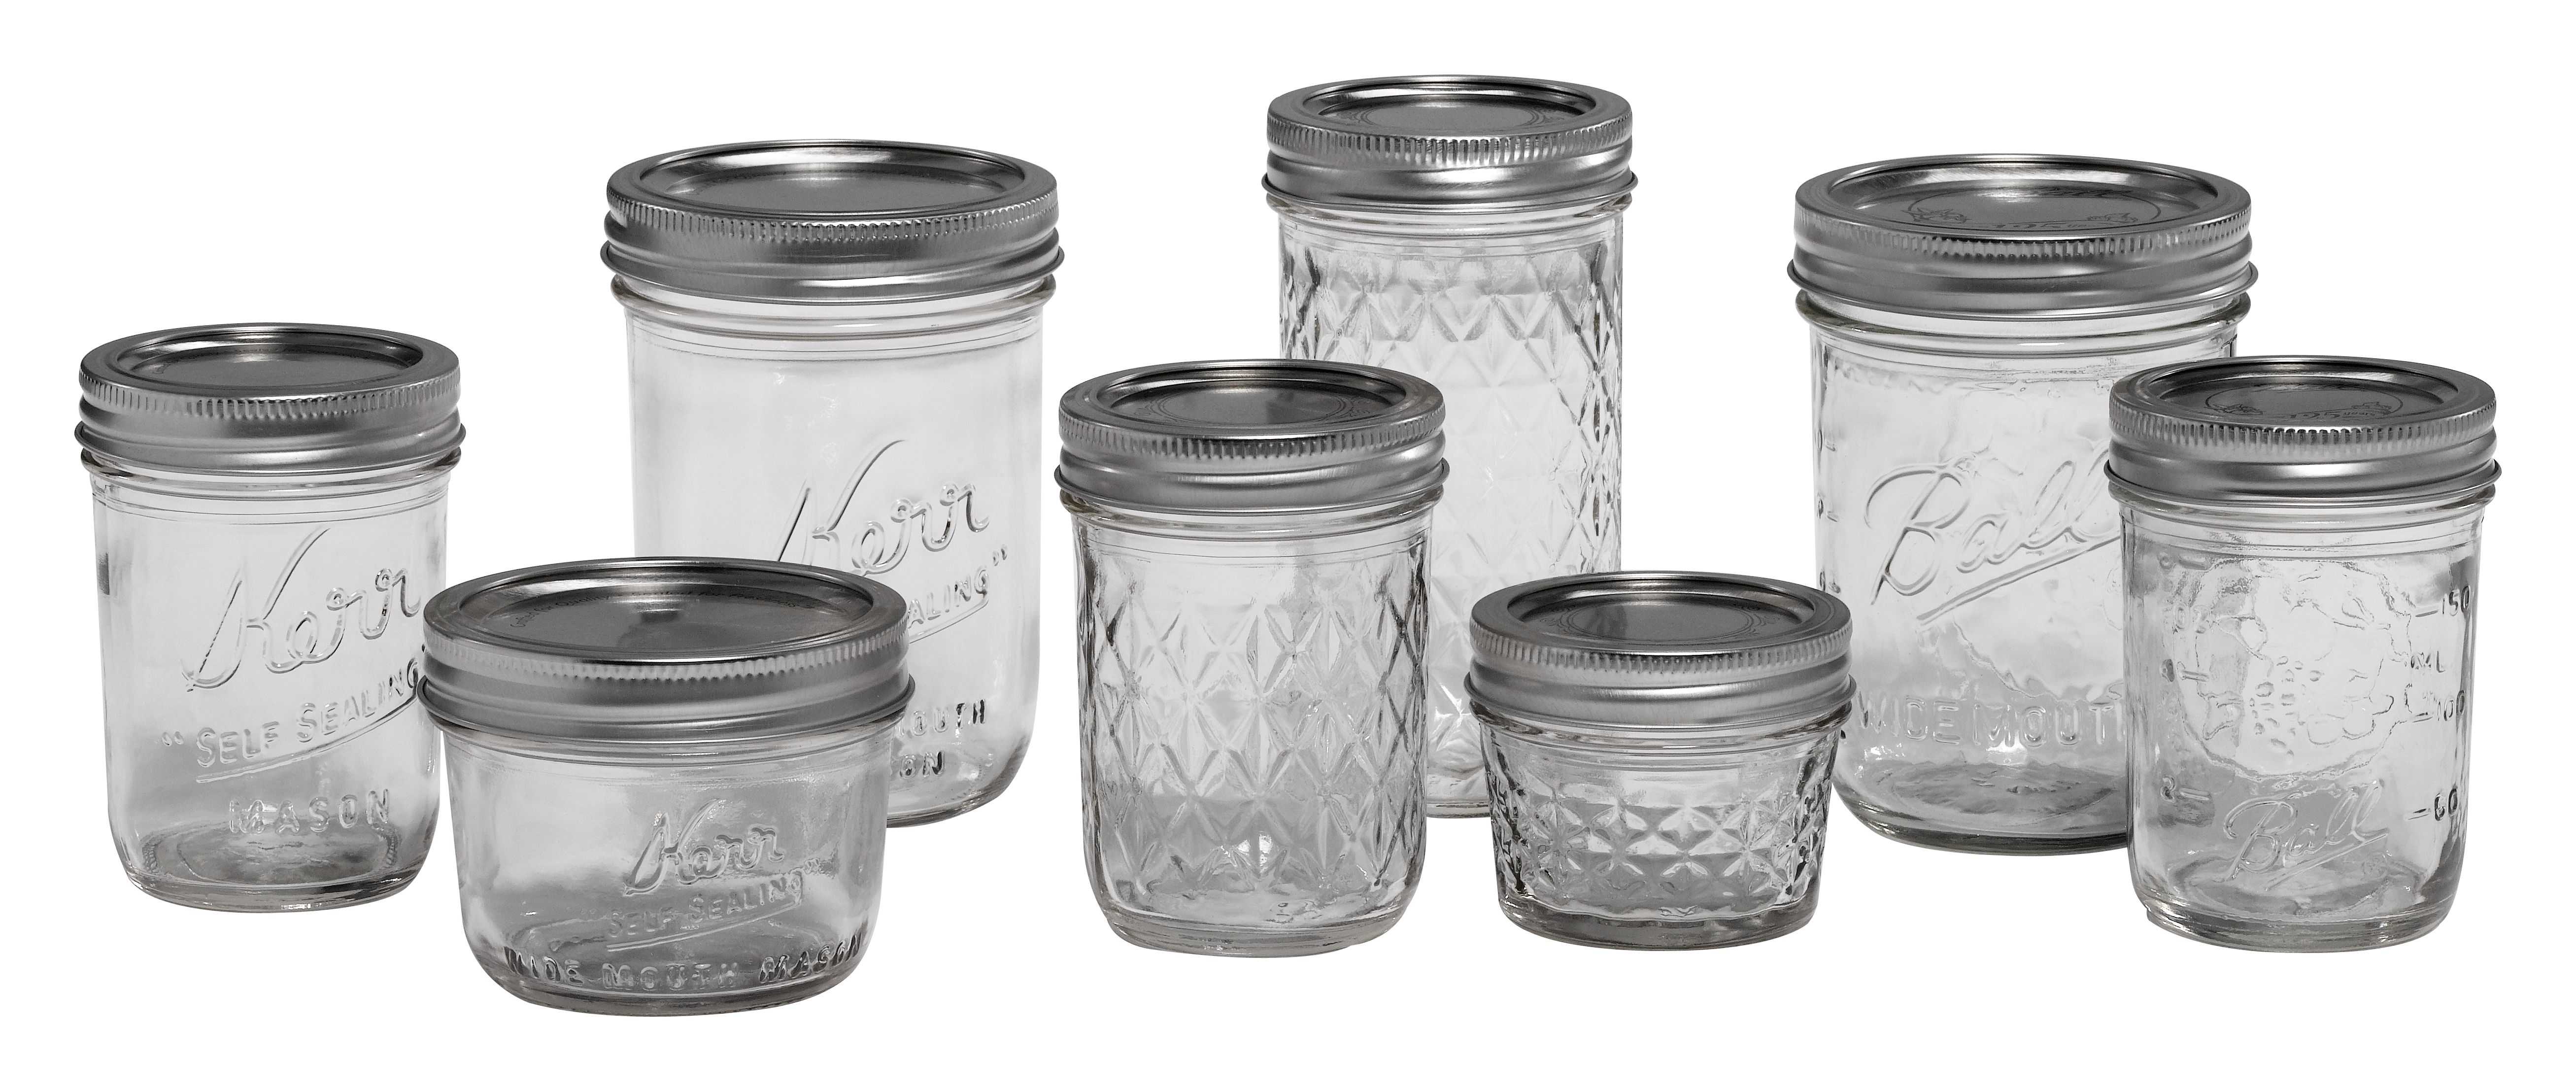 Mason Jars: Your Questions Answered